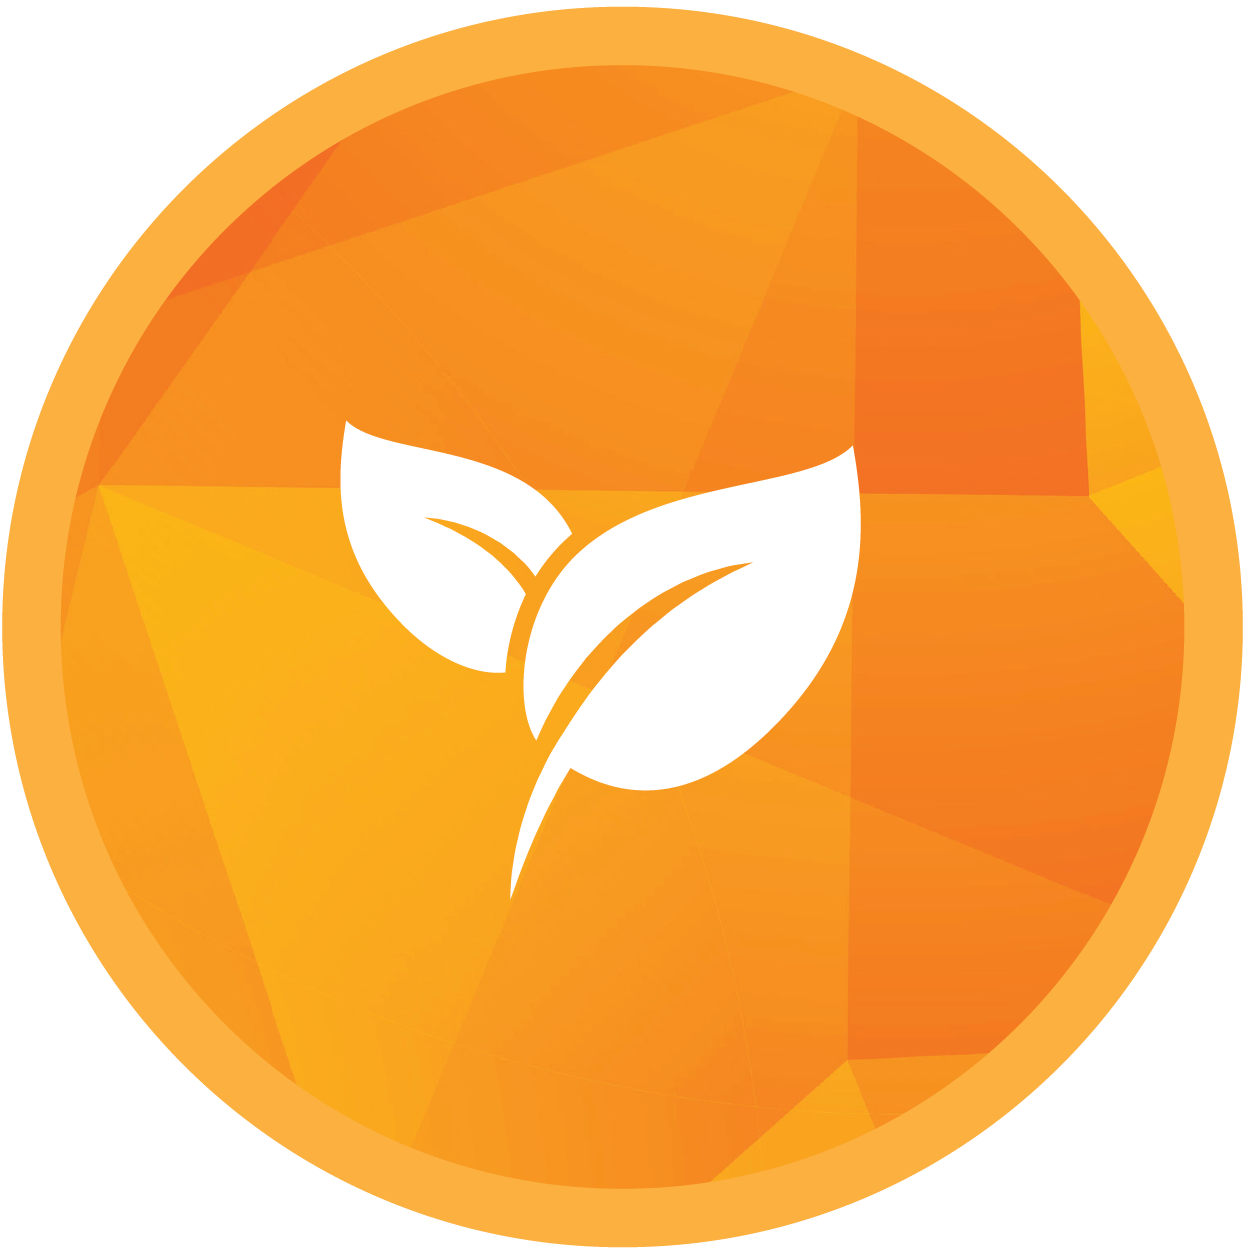 Circle icon with two leaves to symbolize environmentally friendly